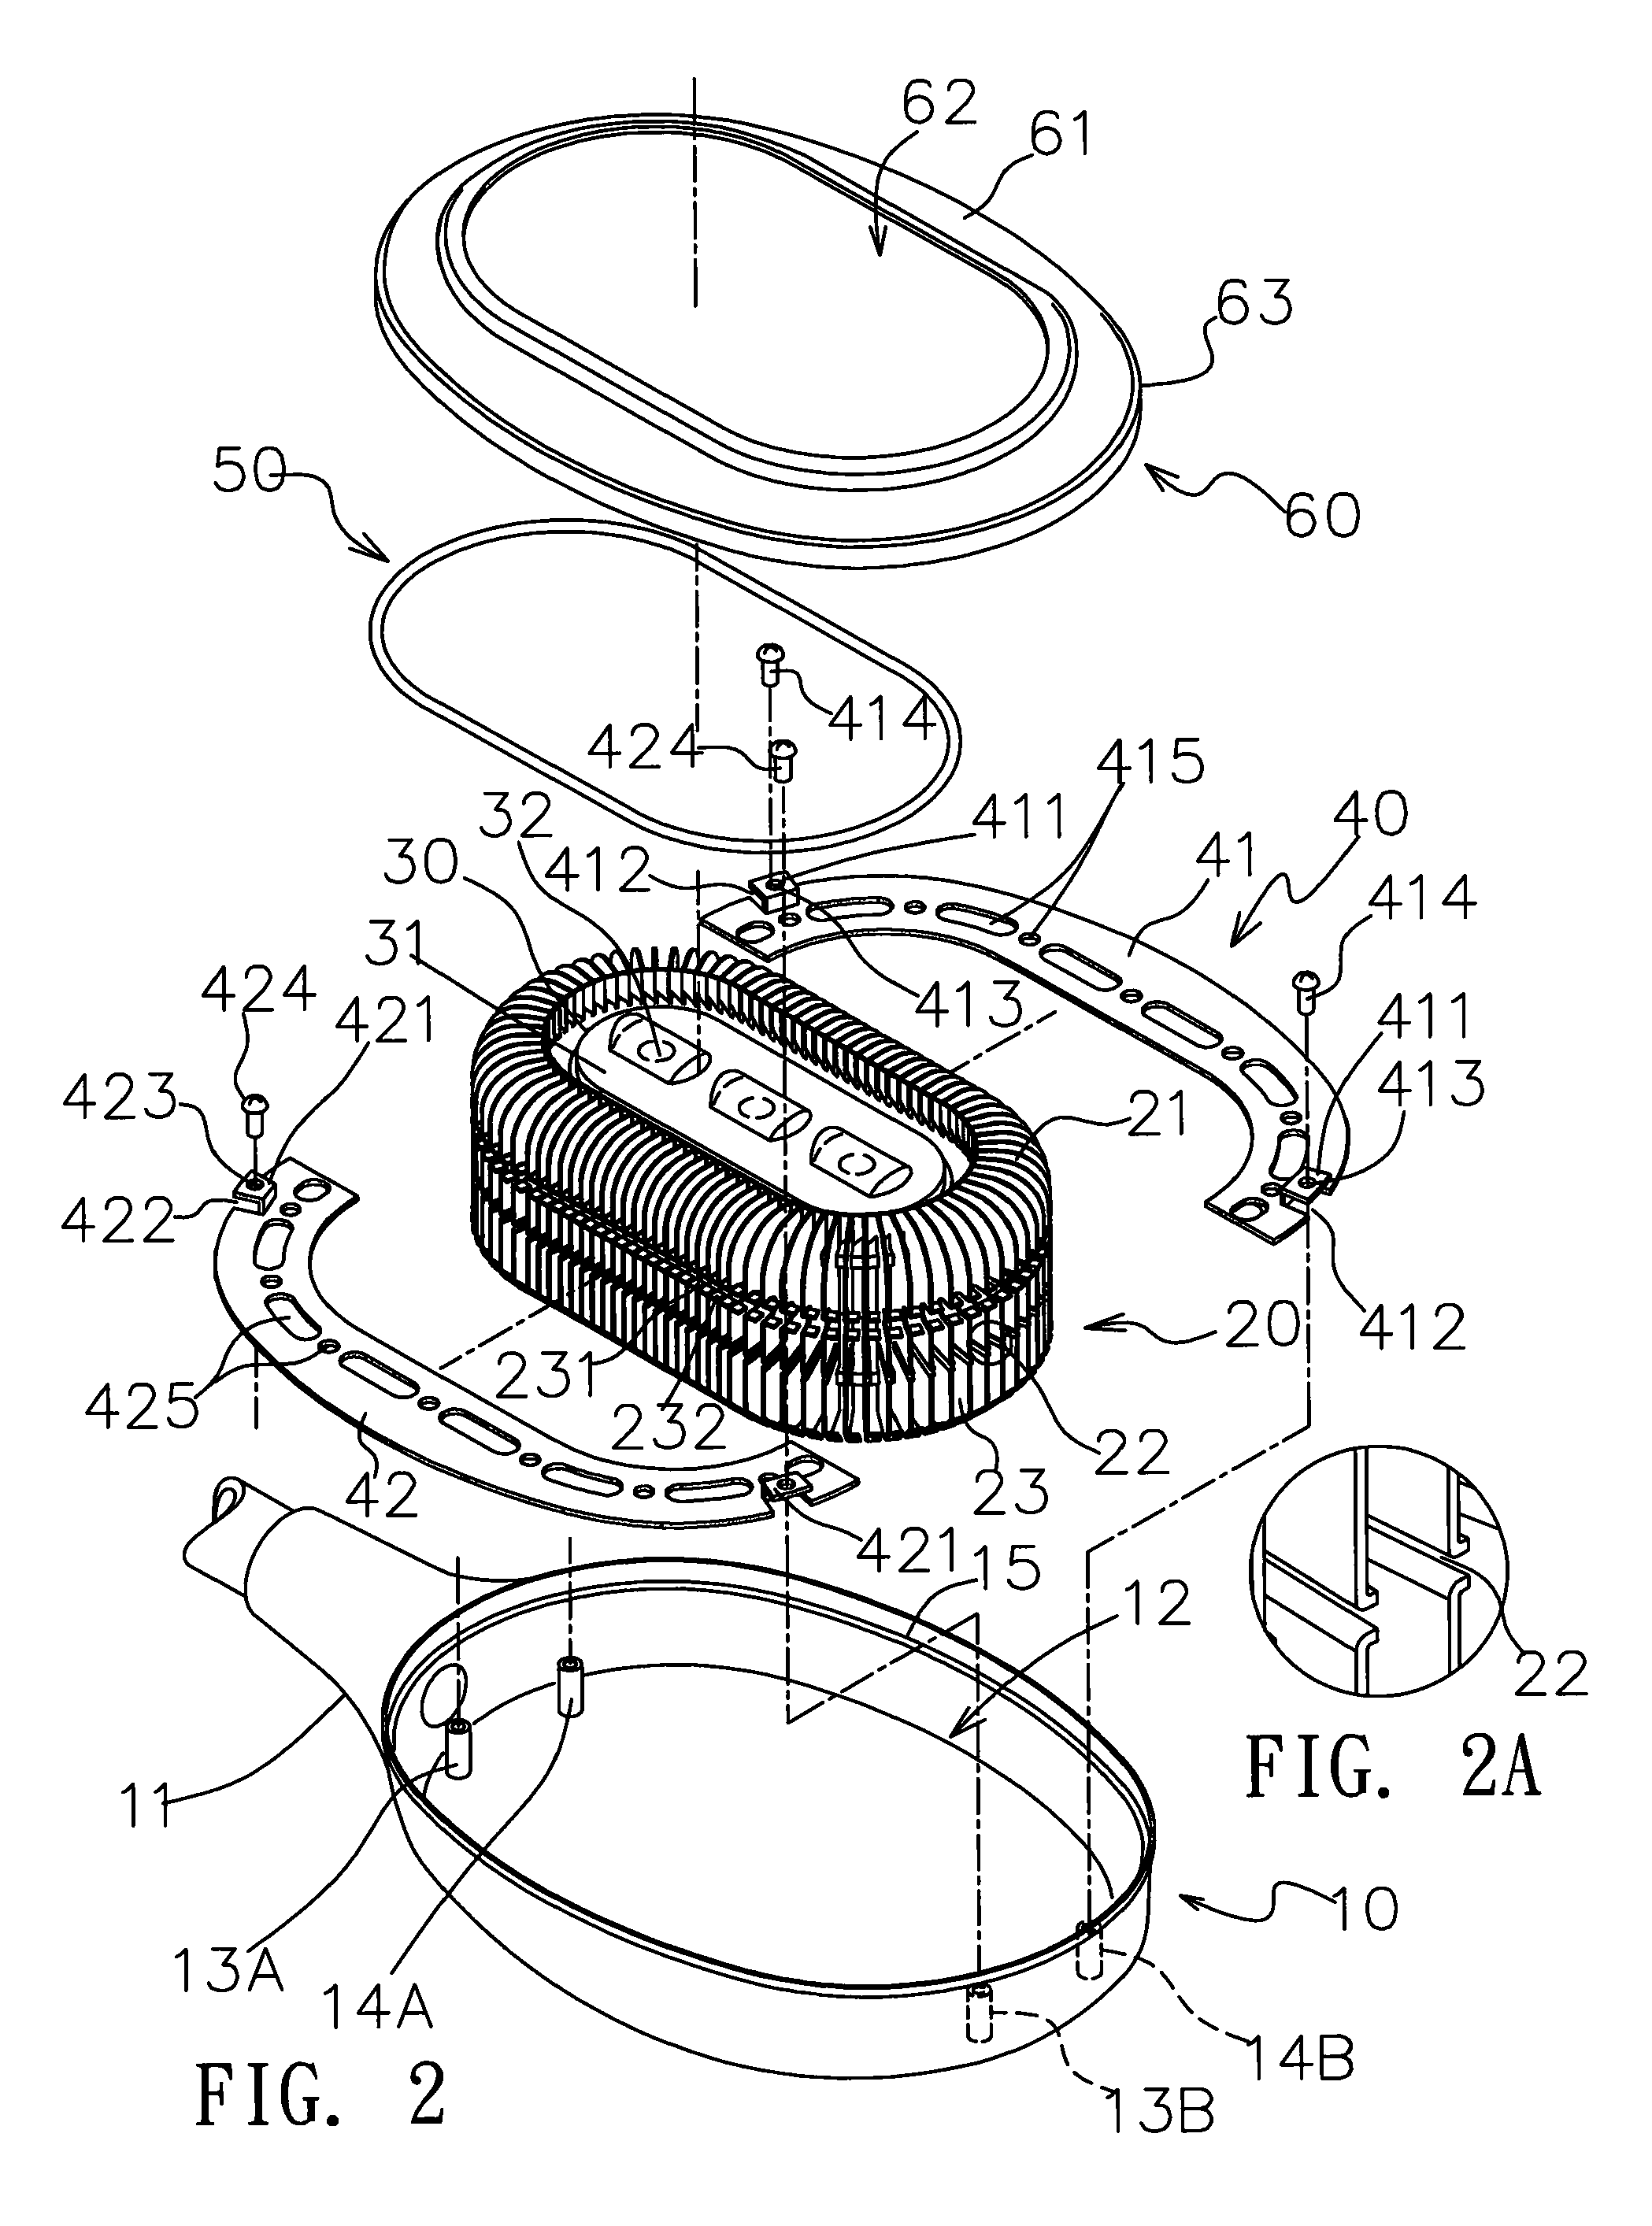 Apparatus for fixing LED light engine to lamp fixture